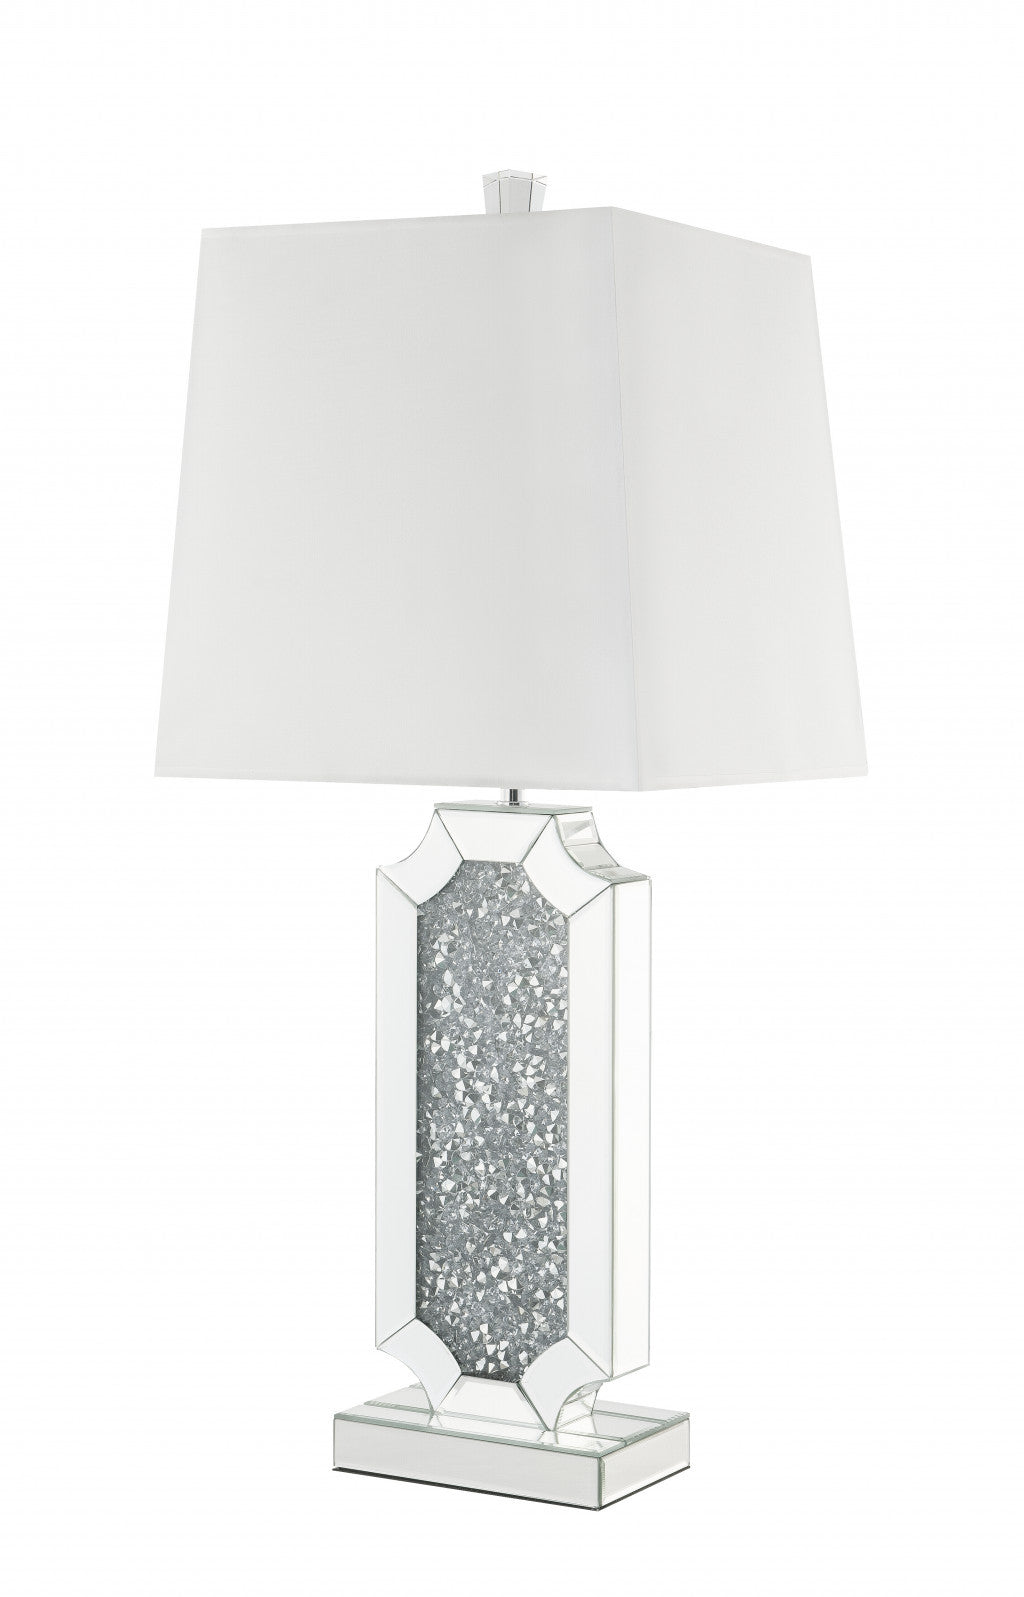 33" Mirrored Glass Faux Crystals Table Lamp With White Square Shade